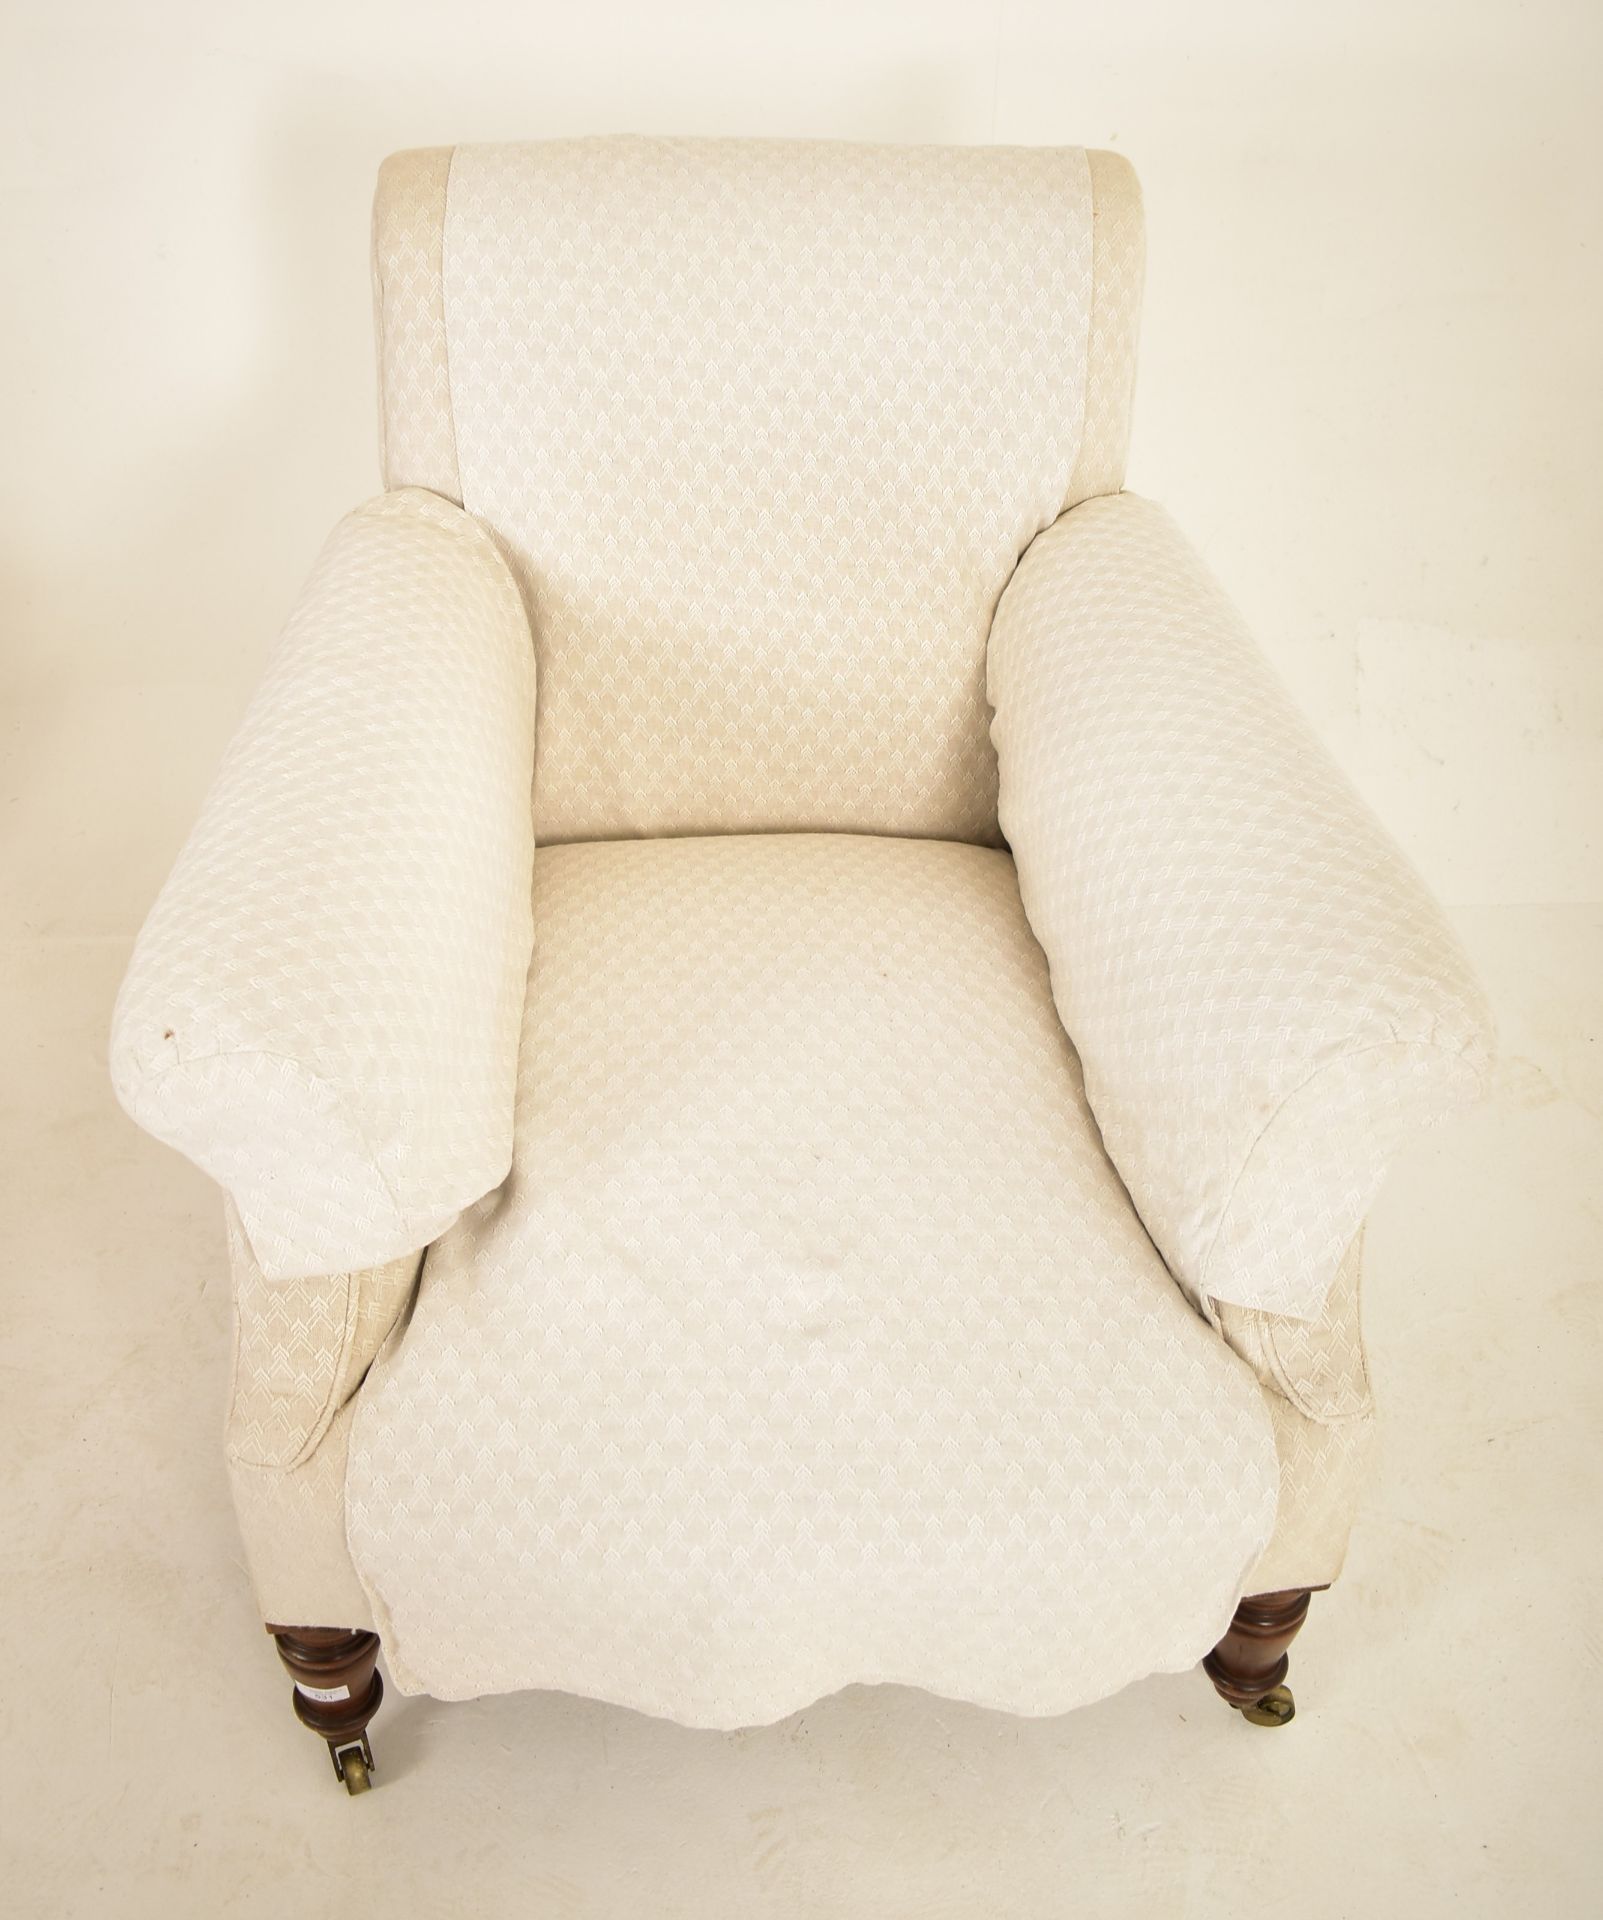 HOWARD & SONS STYLE VICTORIAN UPHOLSTERED ARMCHAIR - Image 3 of 7